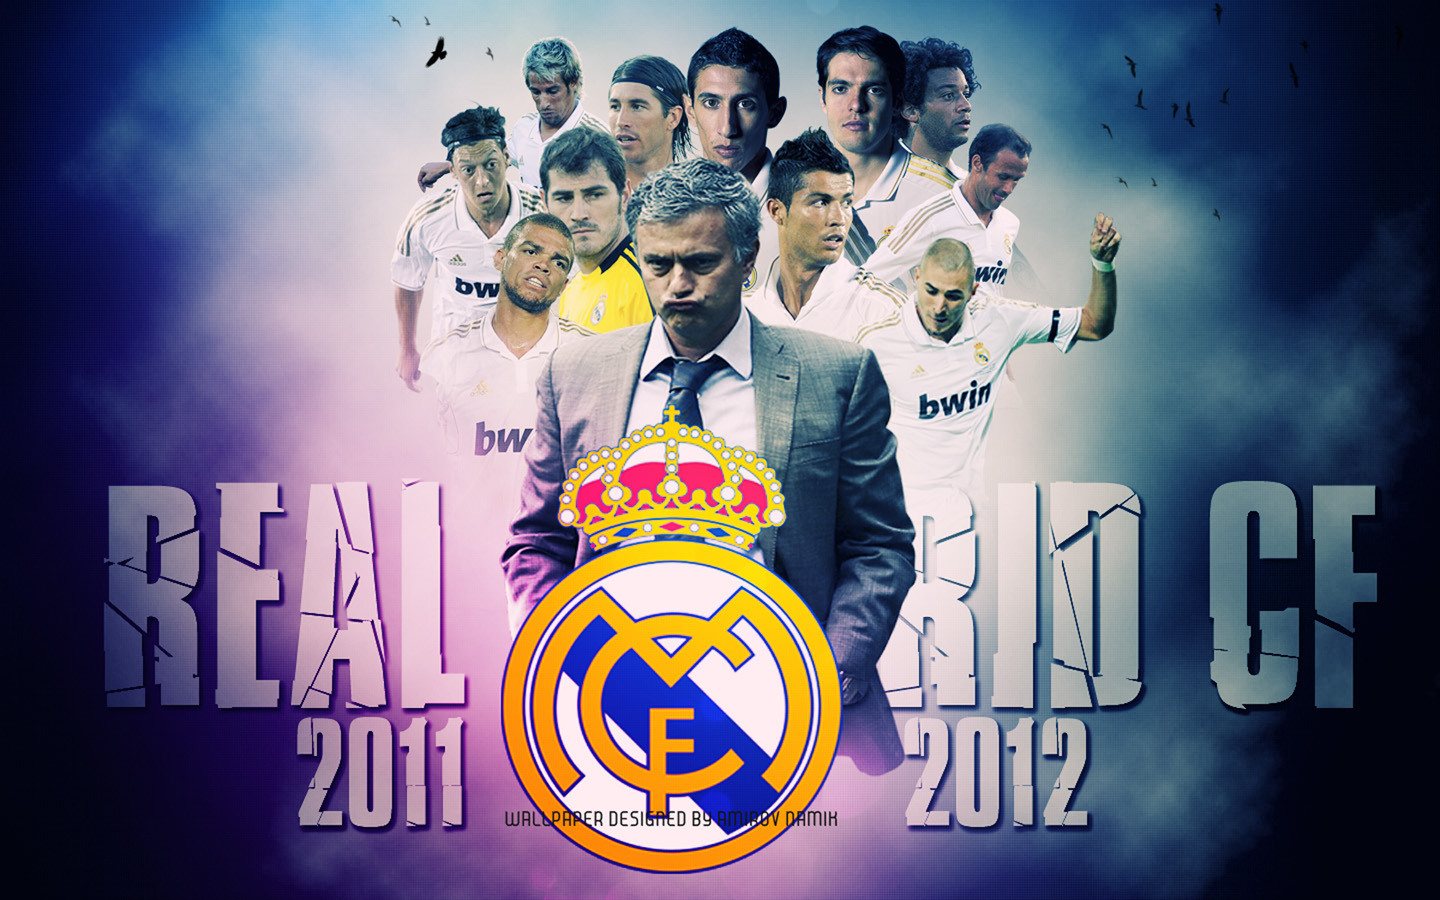 Real Madrid Soccer HD Wallpapers Free HD Wallpapers HD